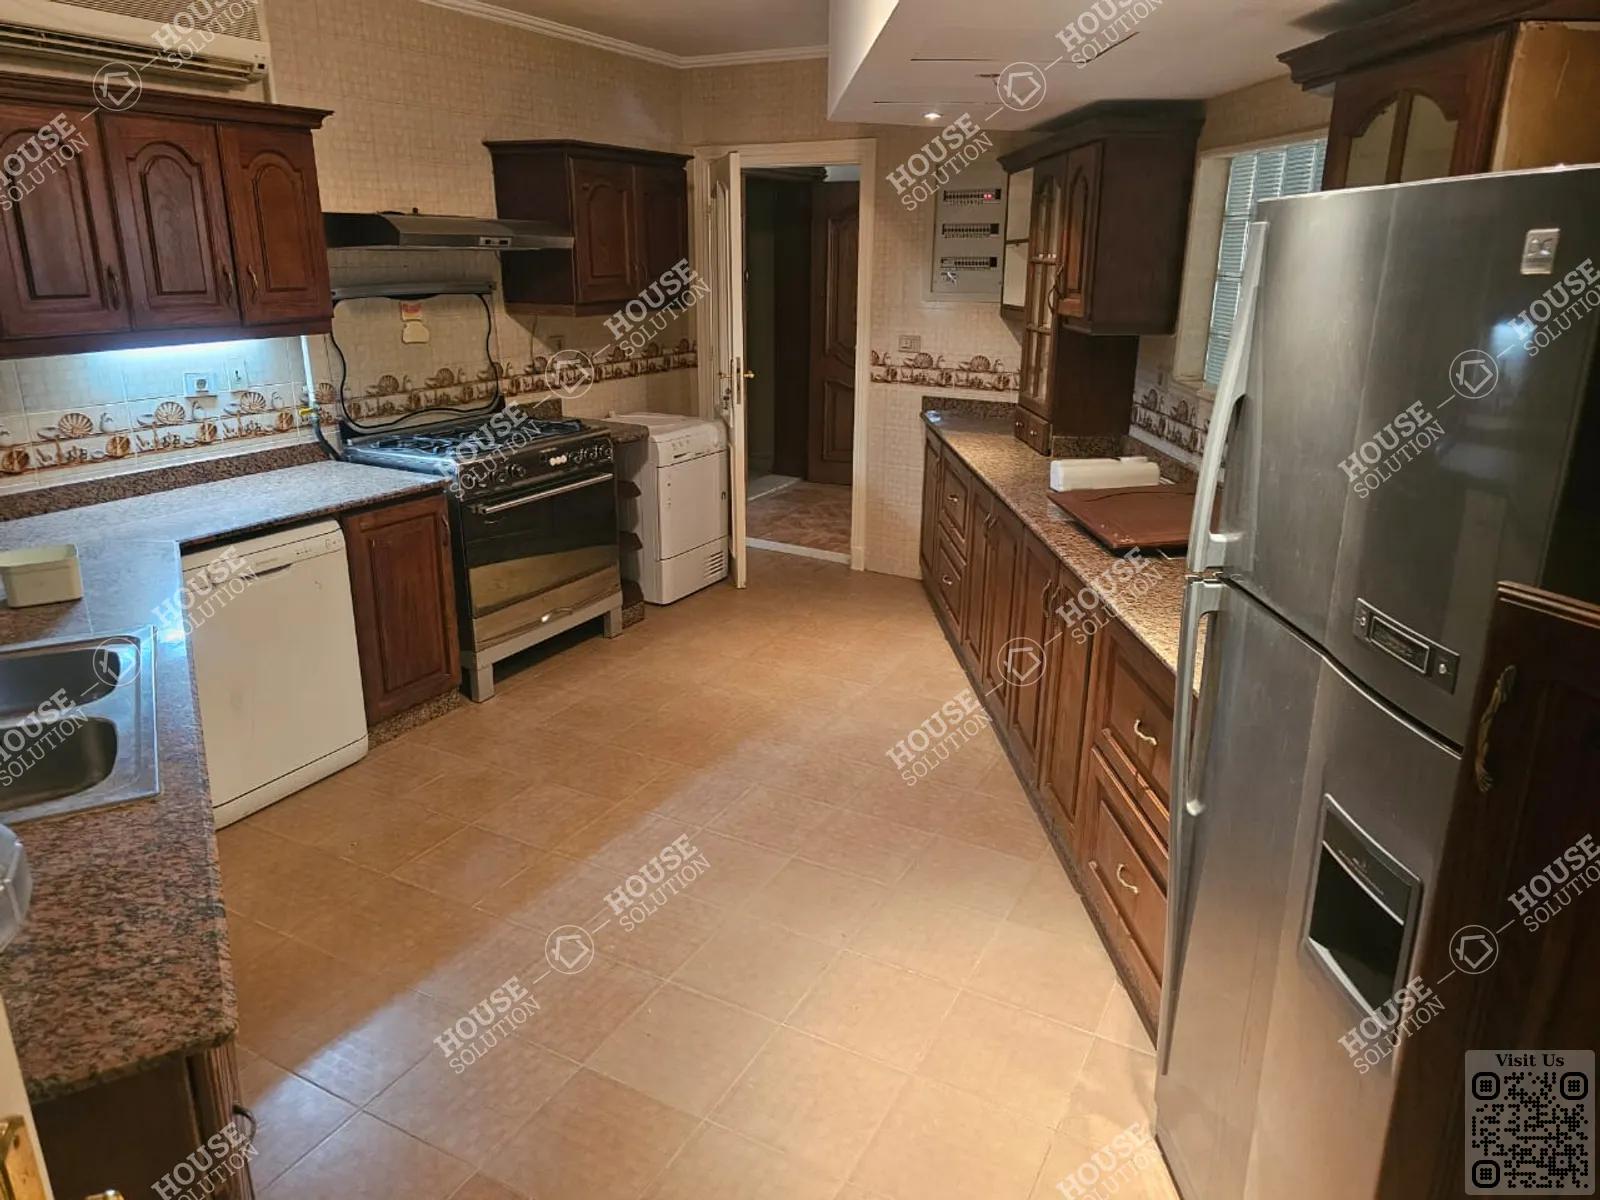 KITCHEN  @ Apartments For Rent In Maadi Maadi Sarayat Area: 225 m² consists of 4 Bedrooms 3 Bathrooms Modern furnished 5 stars #5891-1